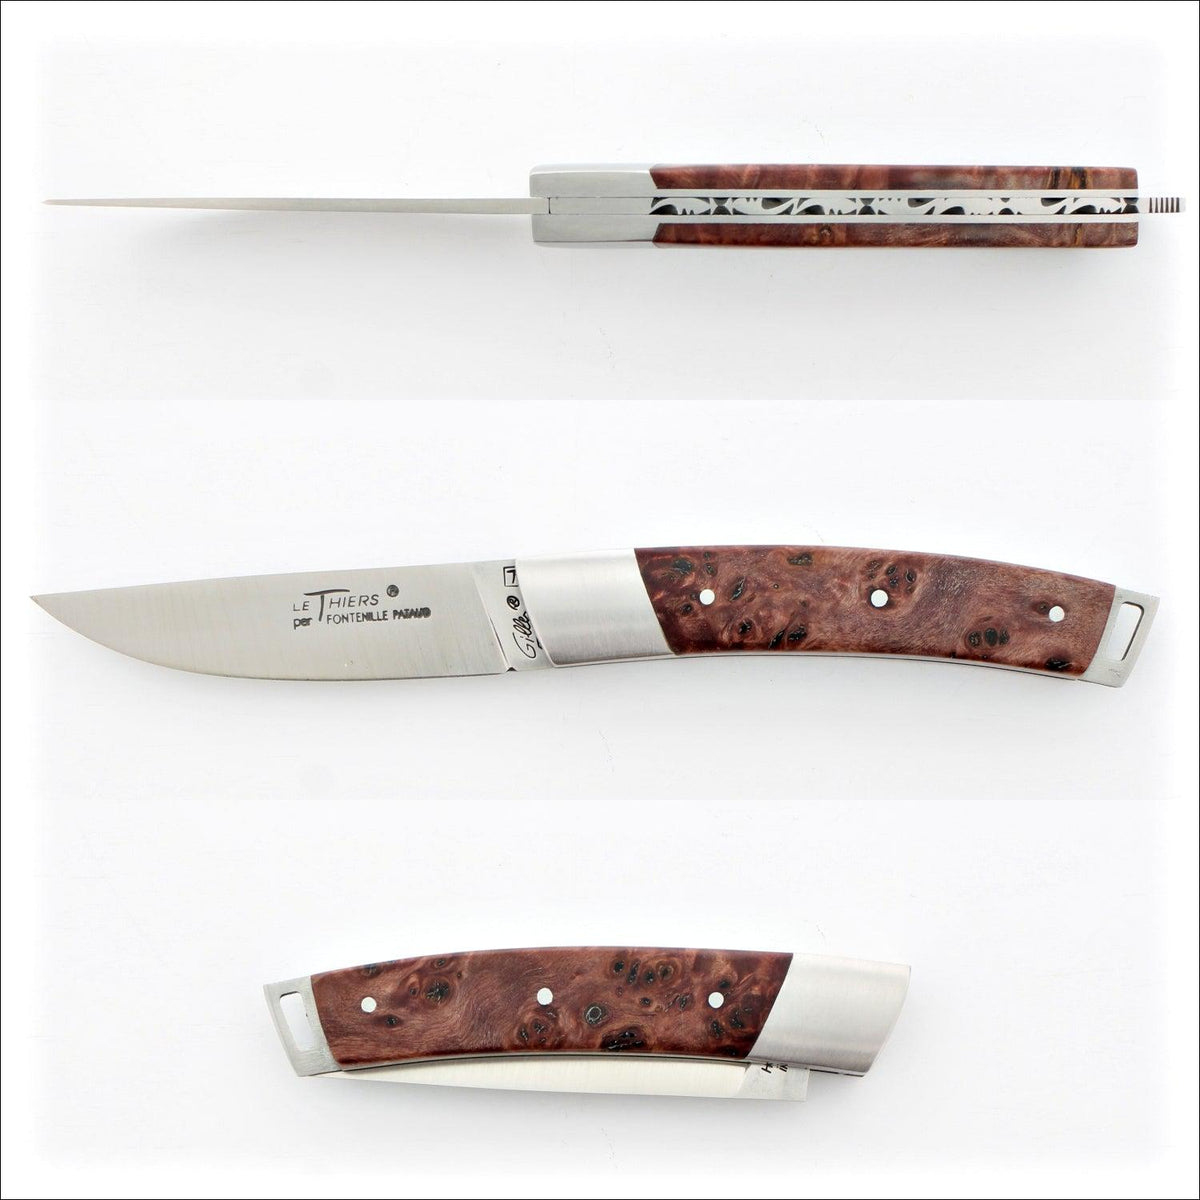 Le Thiers® Pocket Burled Maple Handle